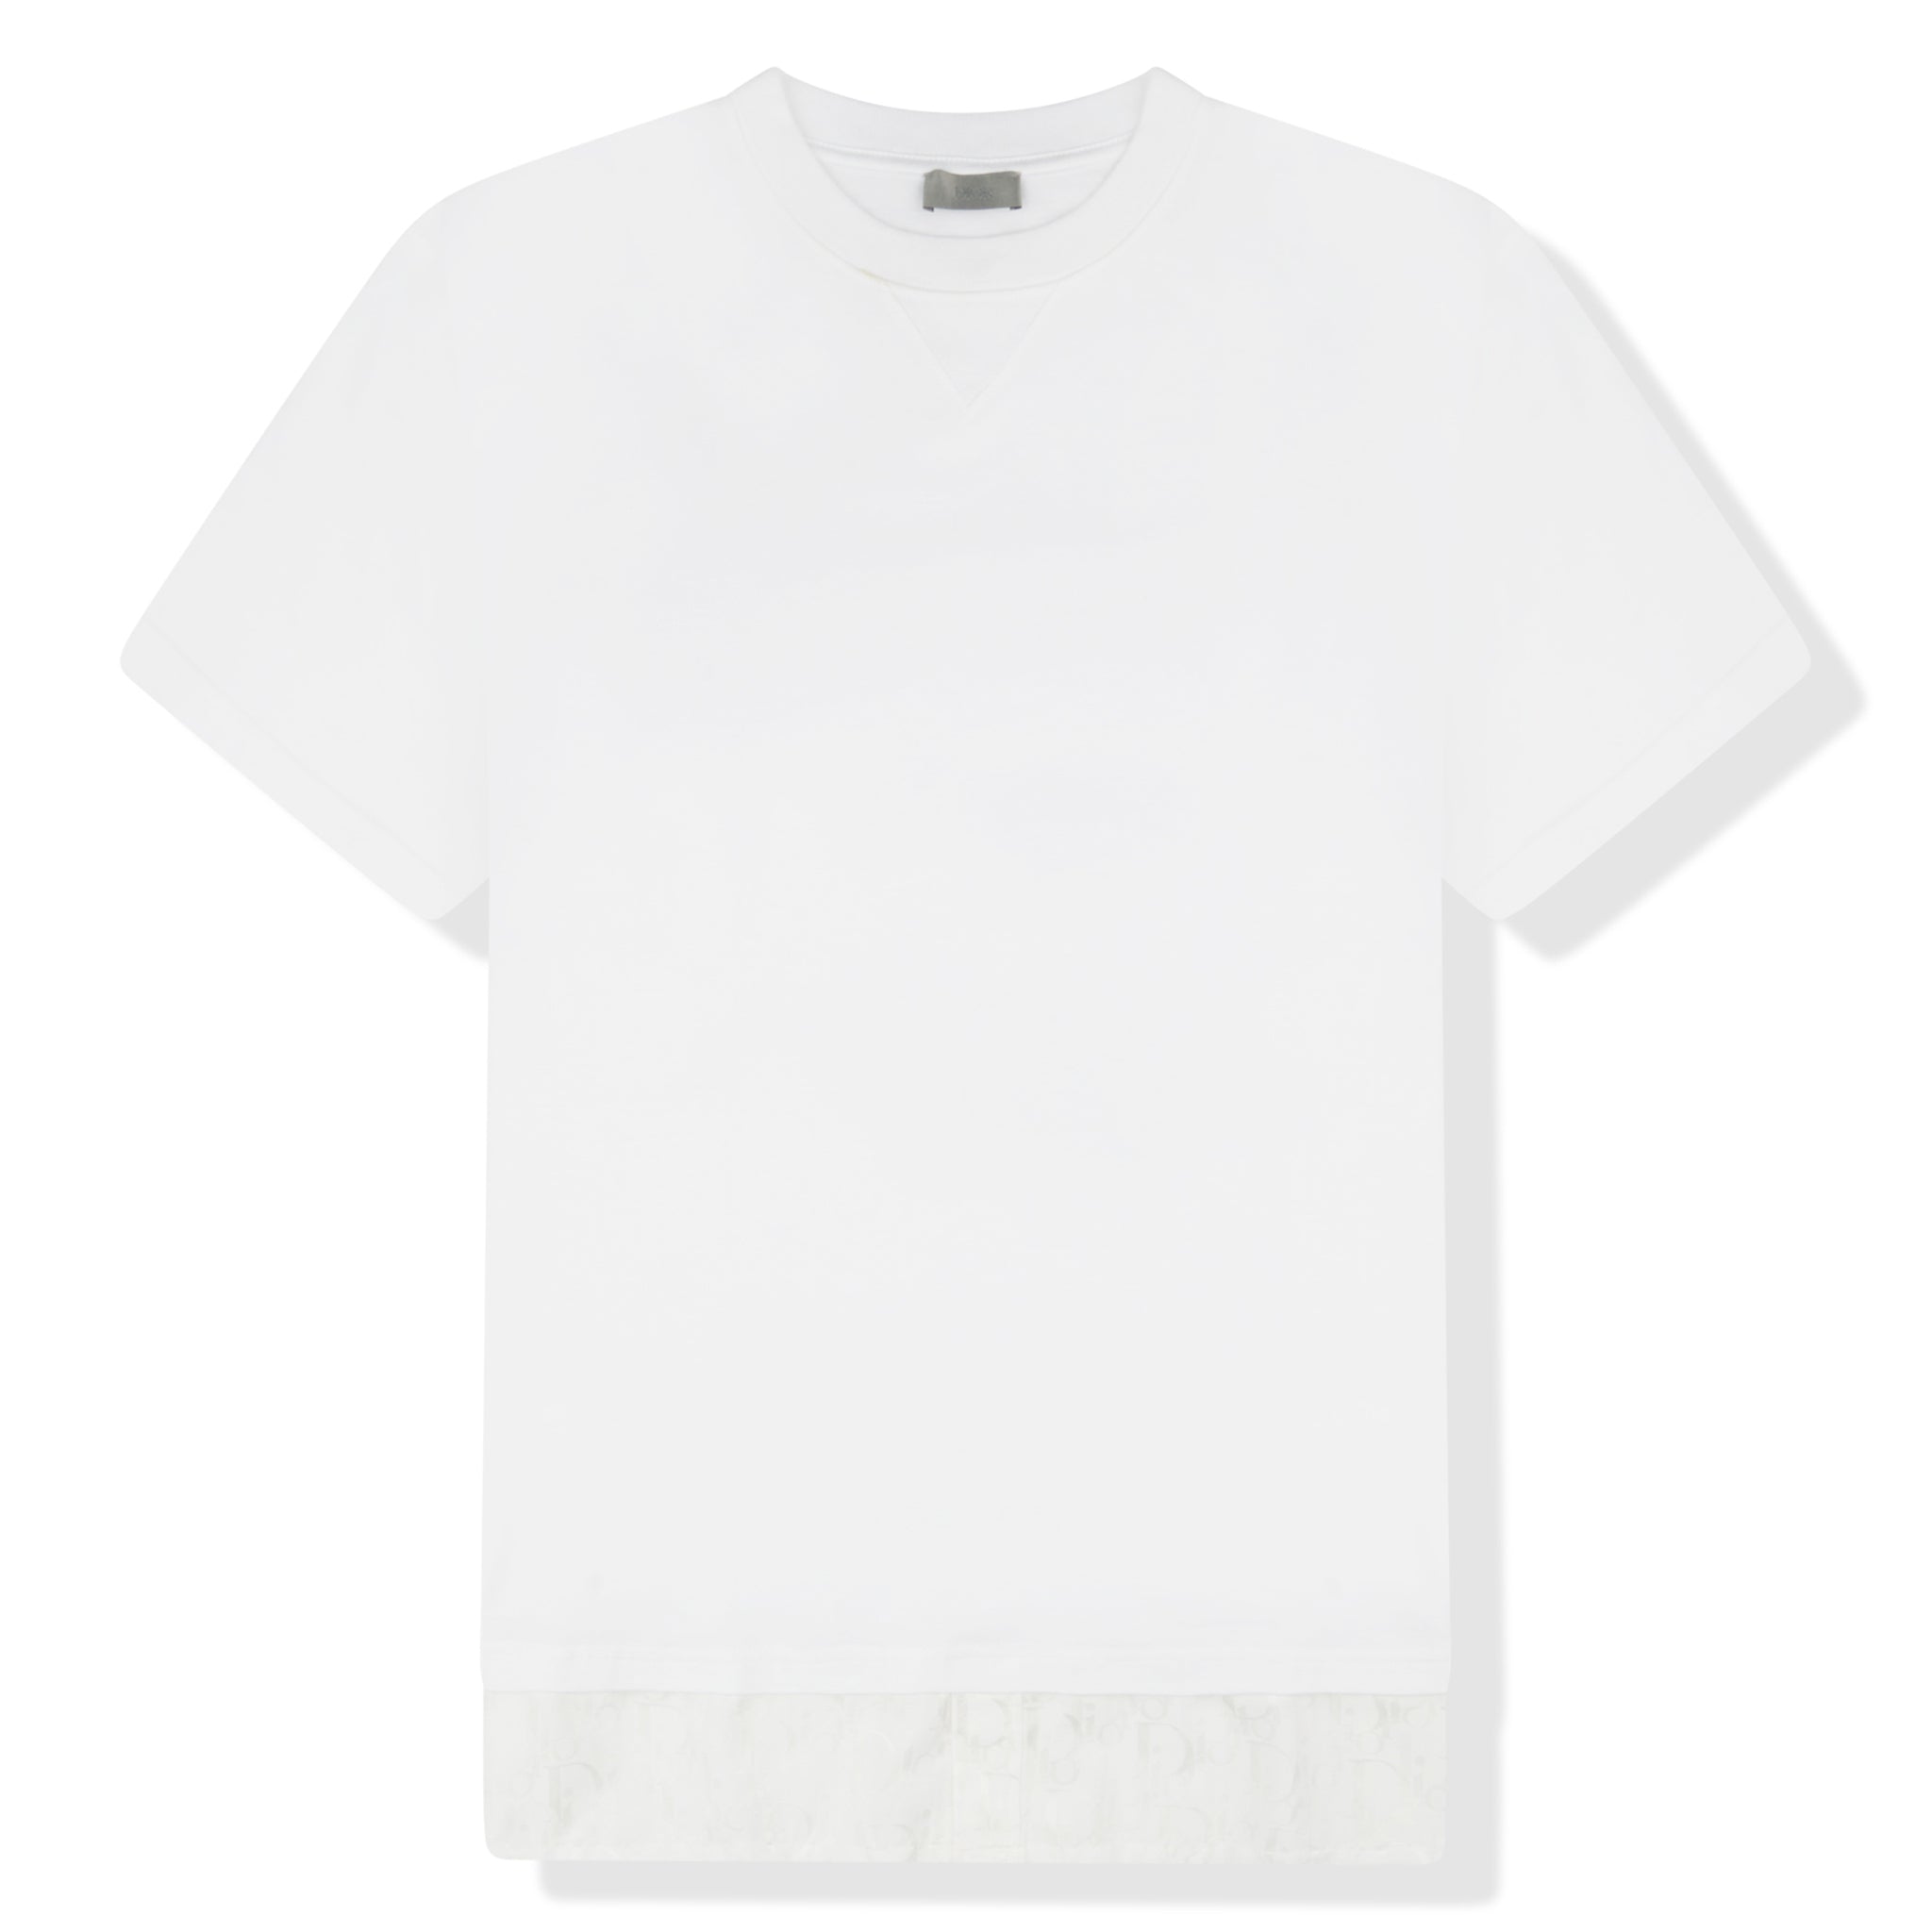 Louis Vuitton - Authenticated T-Shirt - Cotton White Plain for Men, Never Worn, with Tag